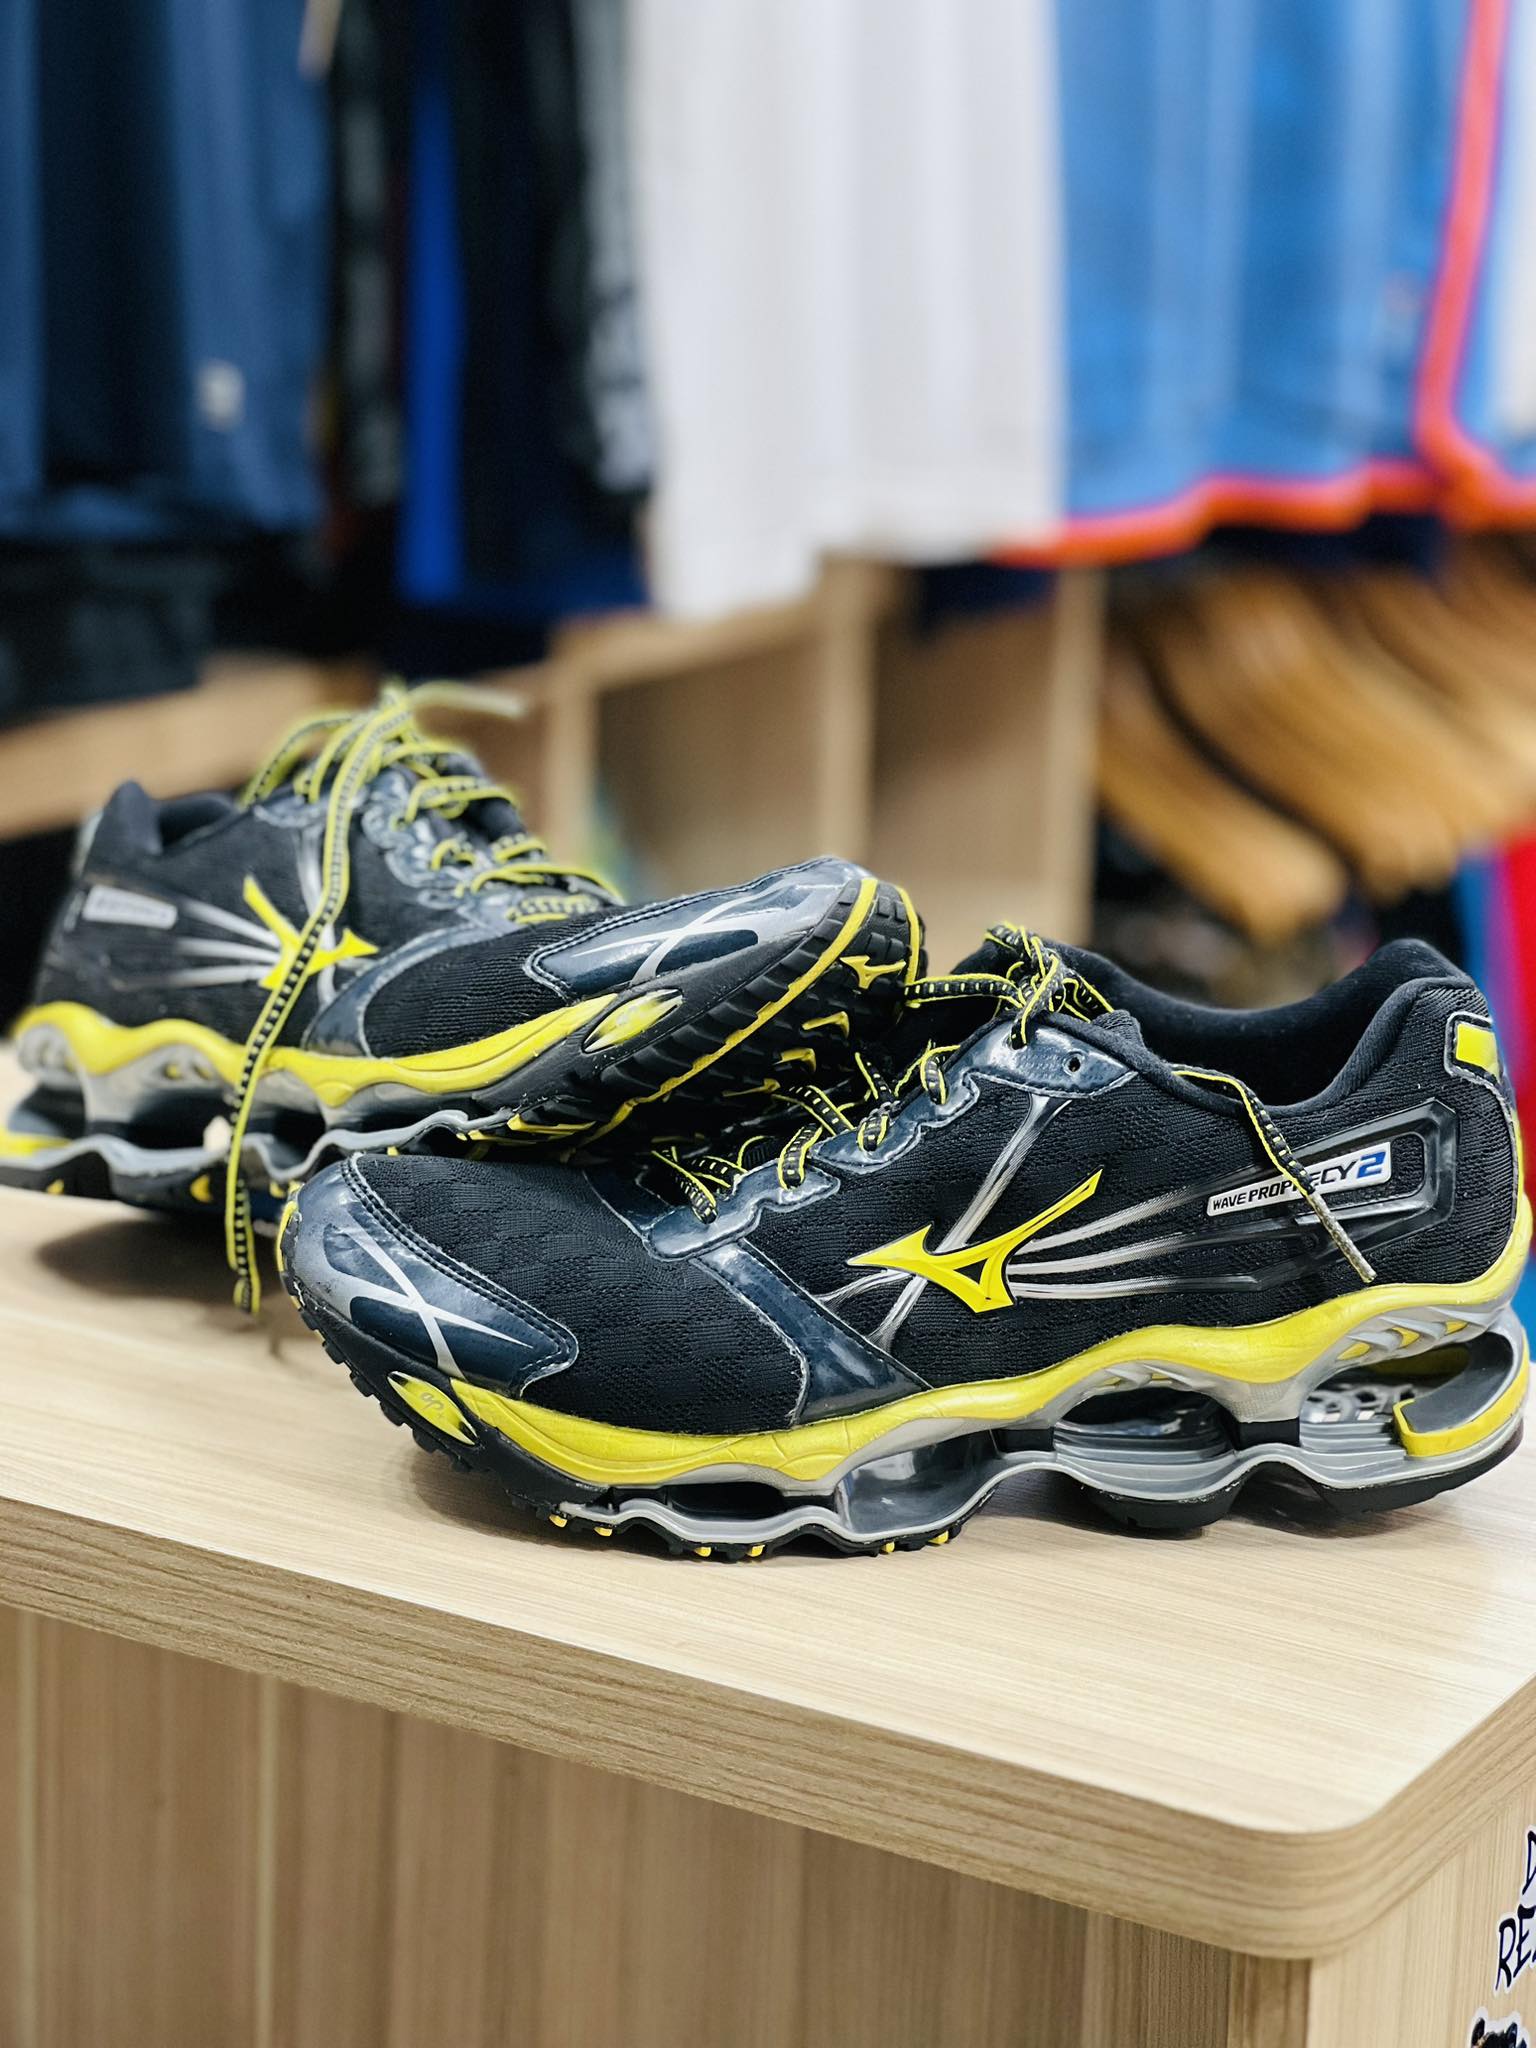 MIZUNO WAVE PROPHECY 21枚目の写真で見えます